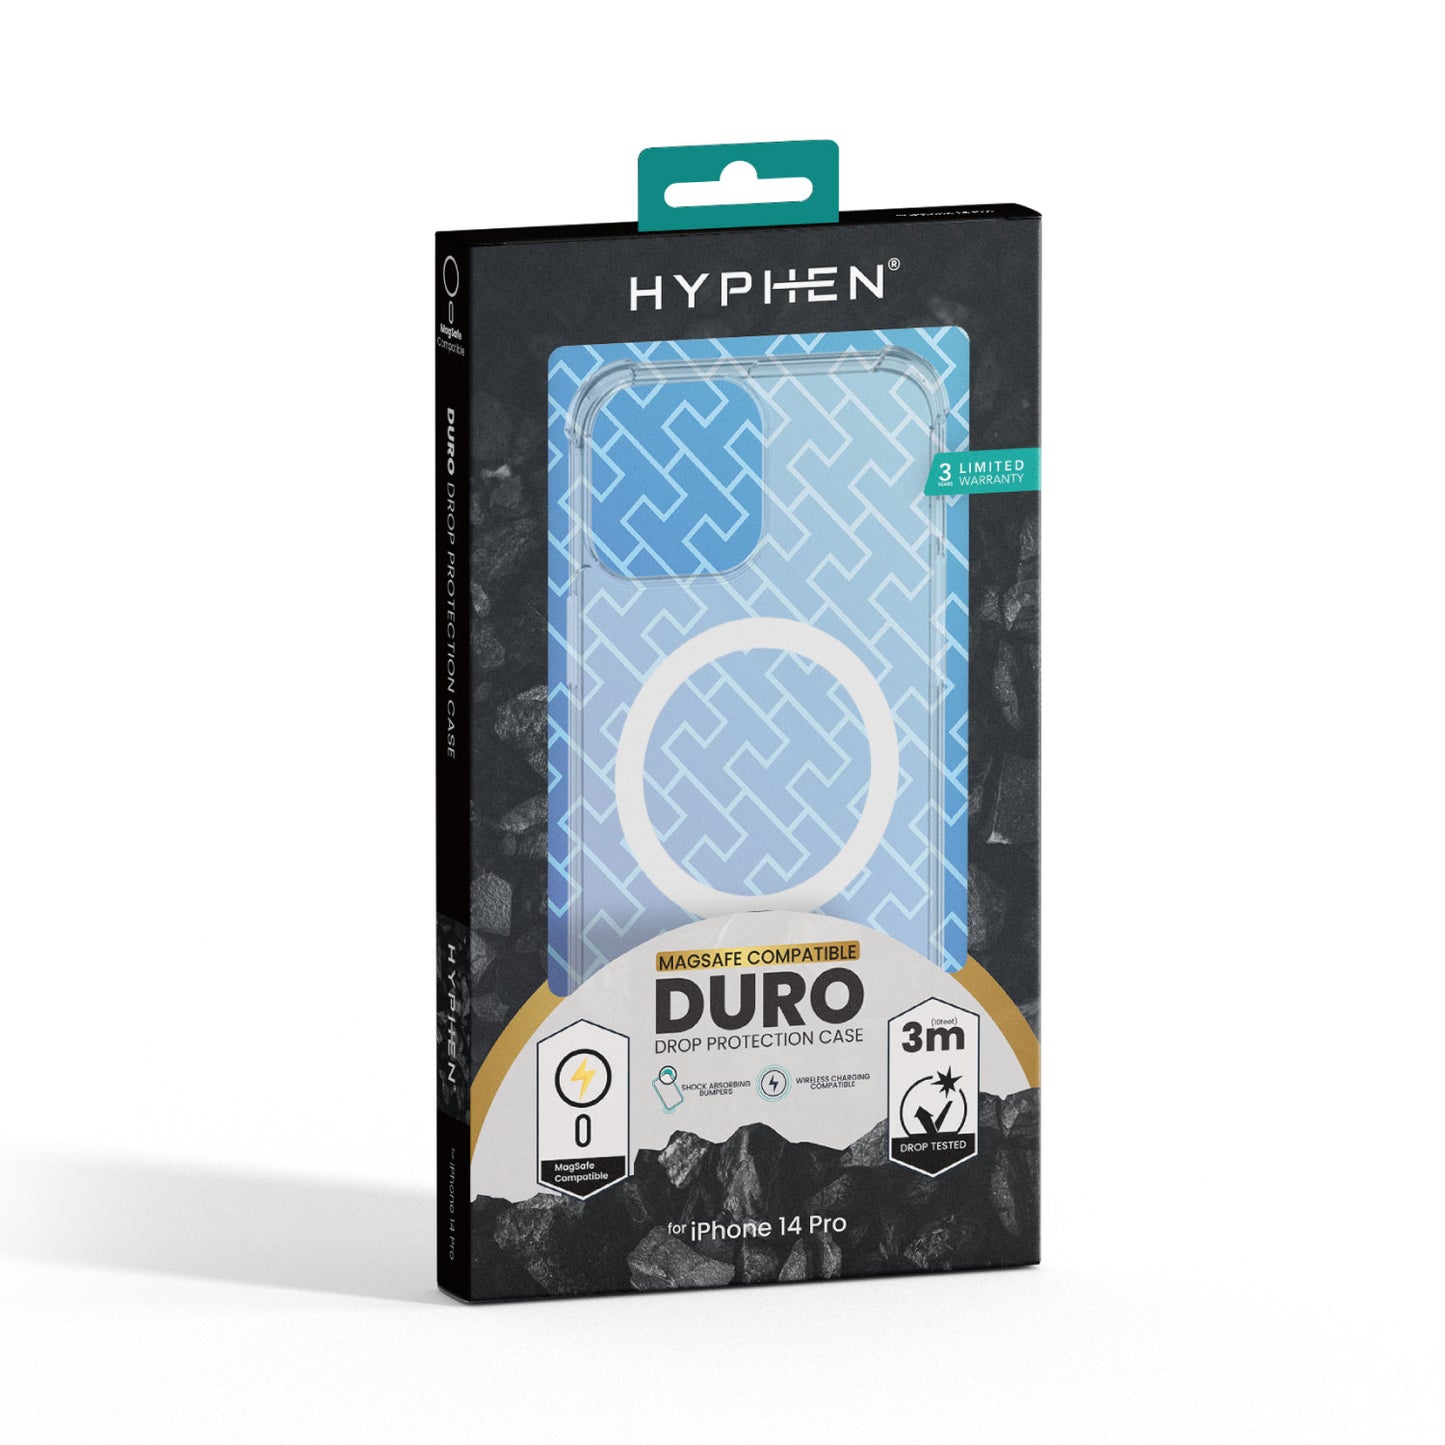 HYPHEN DURO MagSafe Drop Case - iPhone 14 Pro (2022)